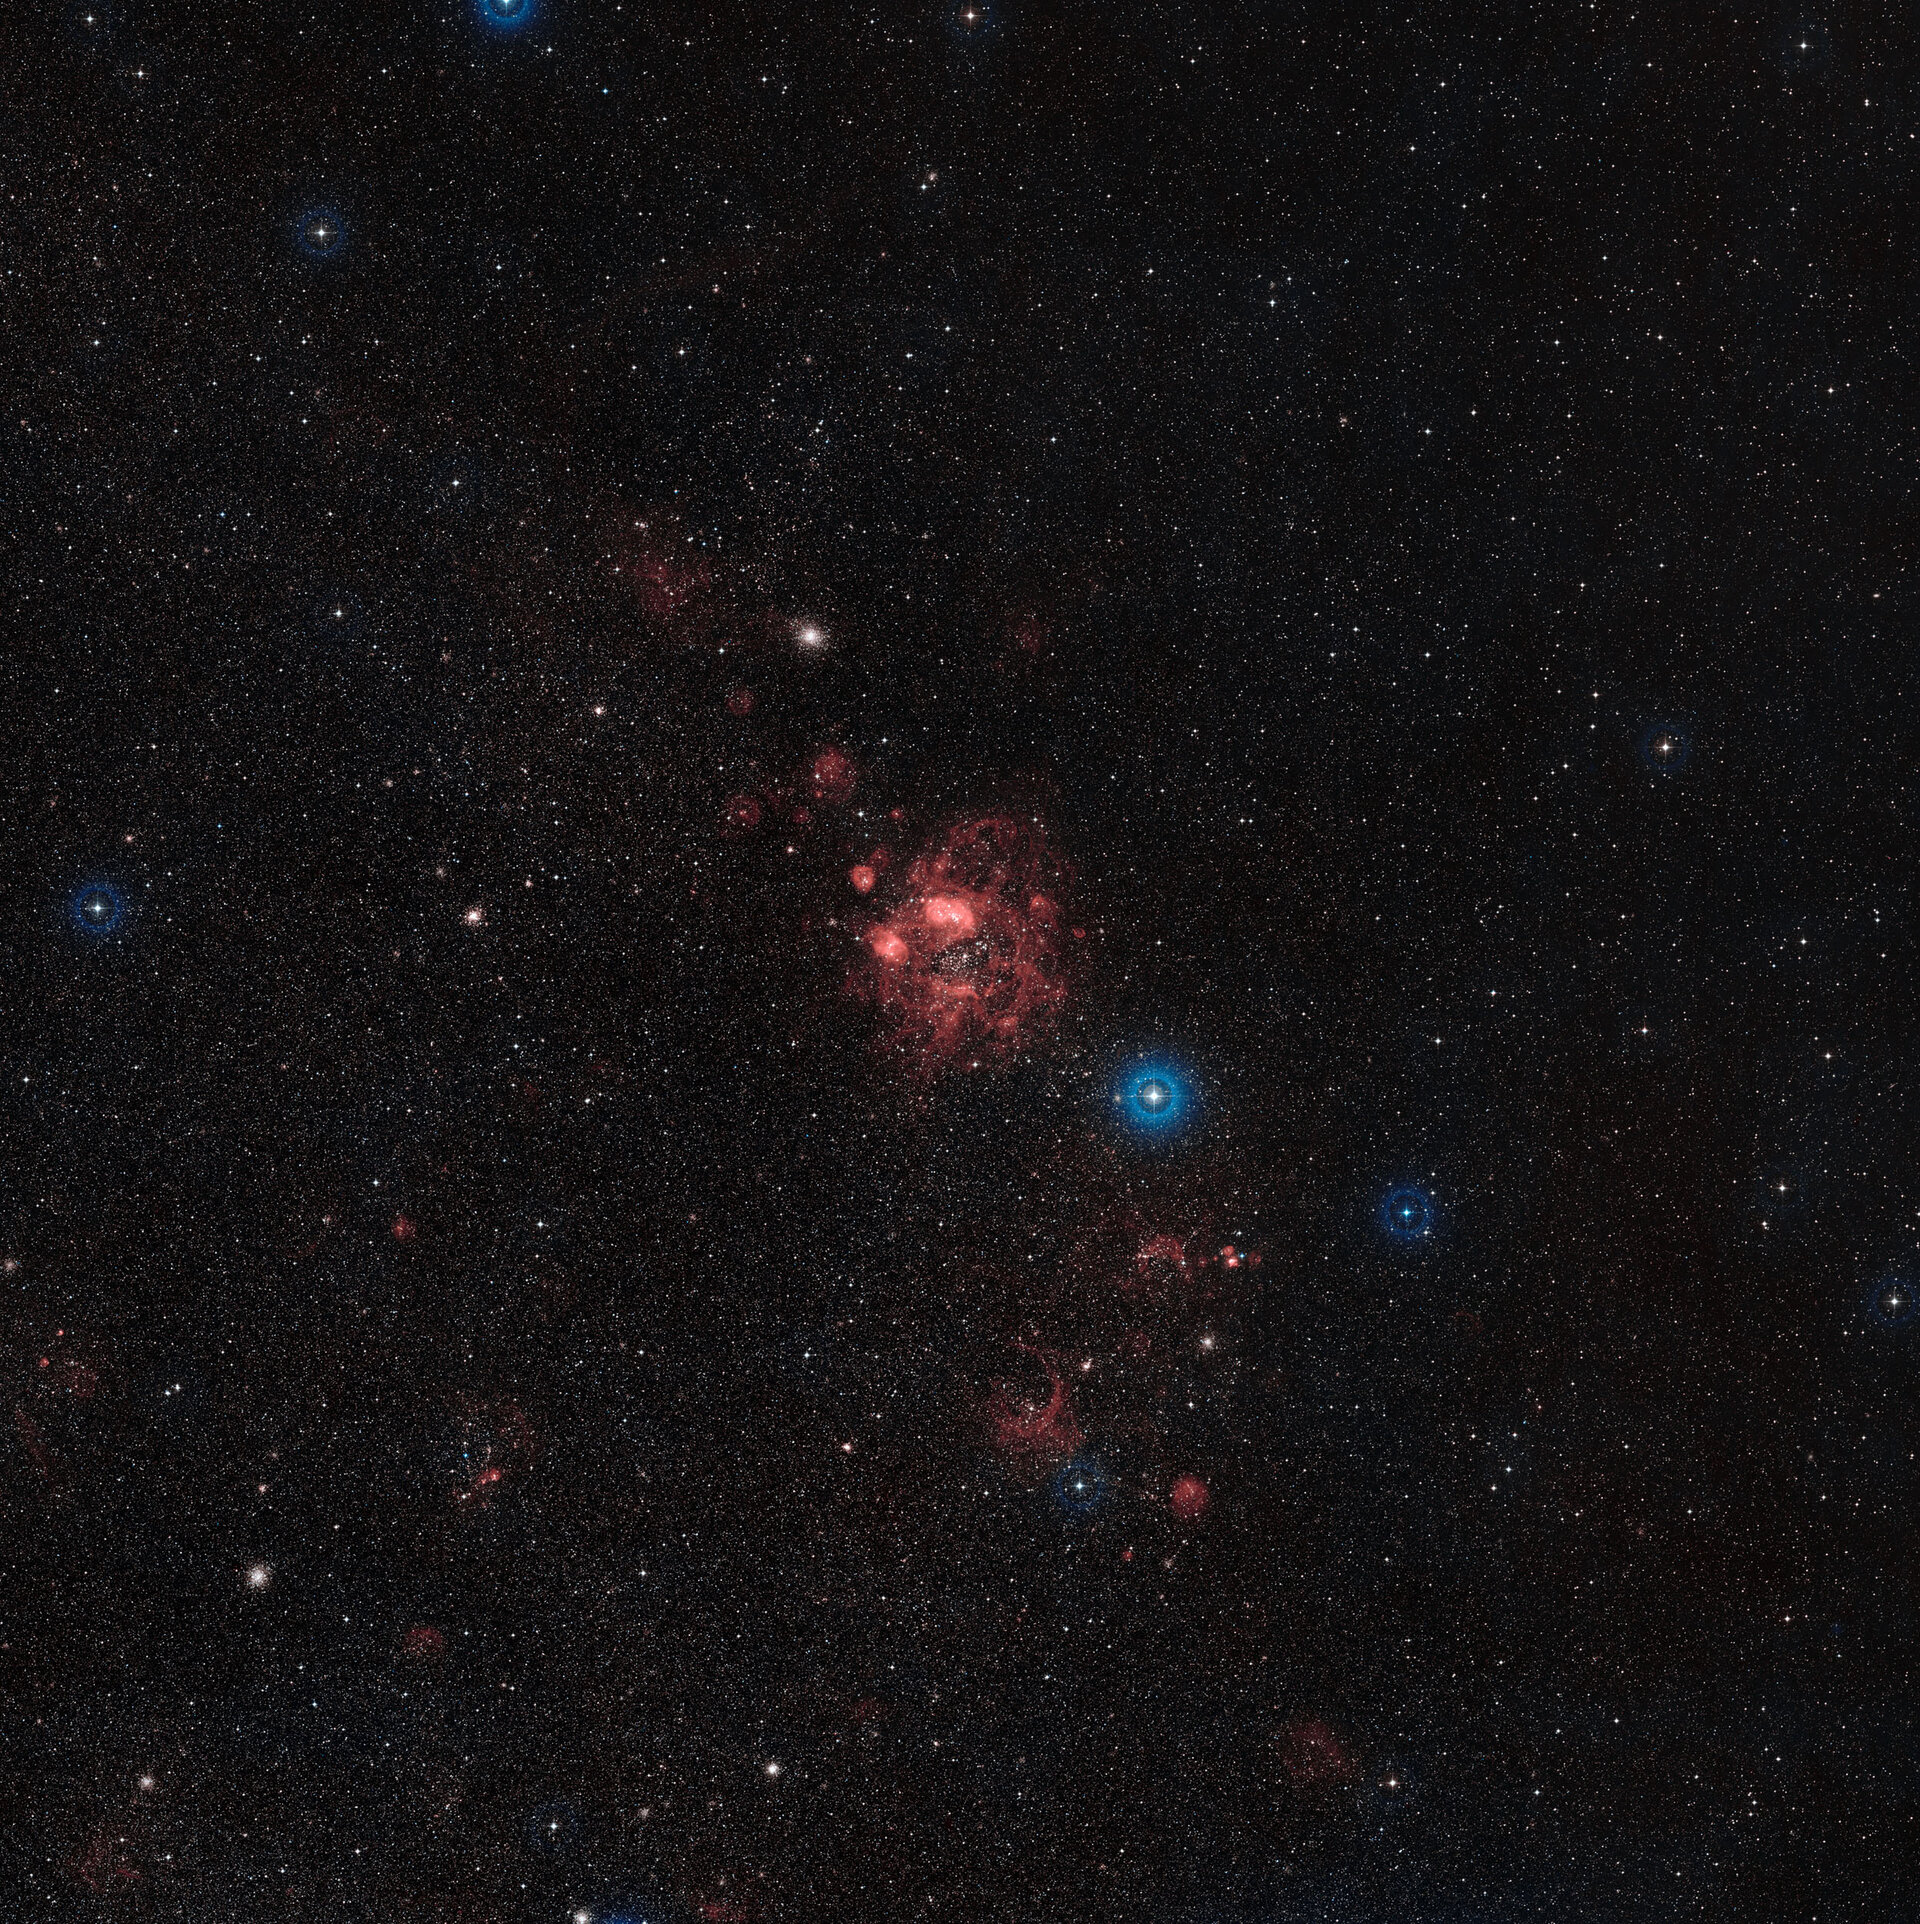 A wide-field view of the N11 star-forming region